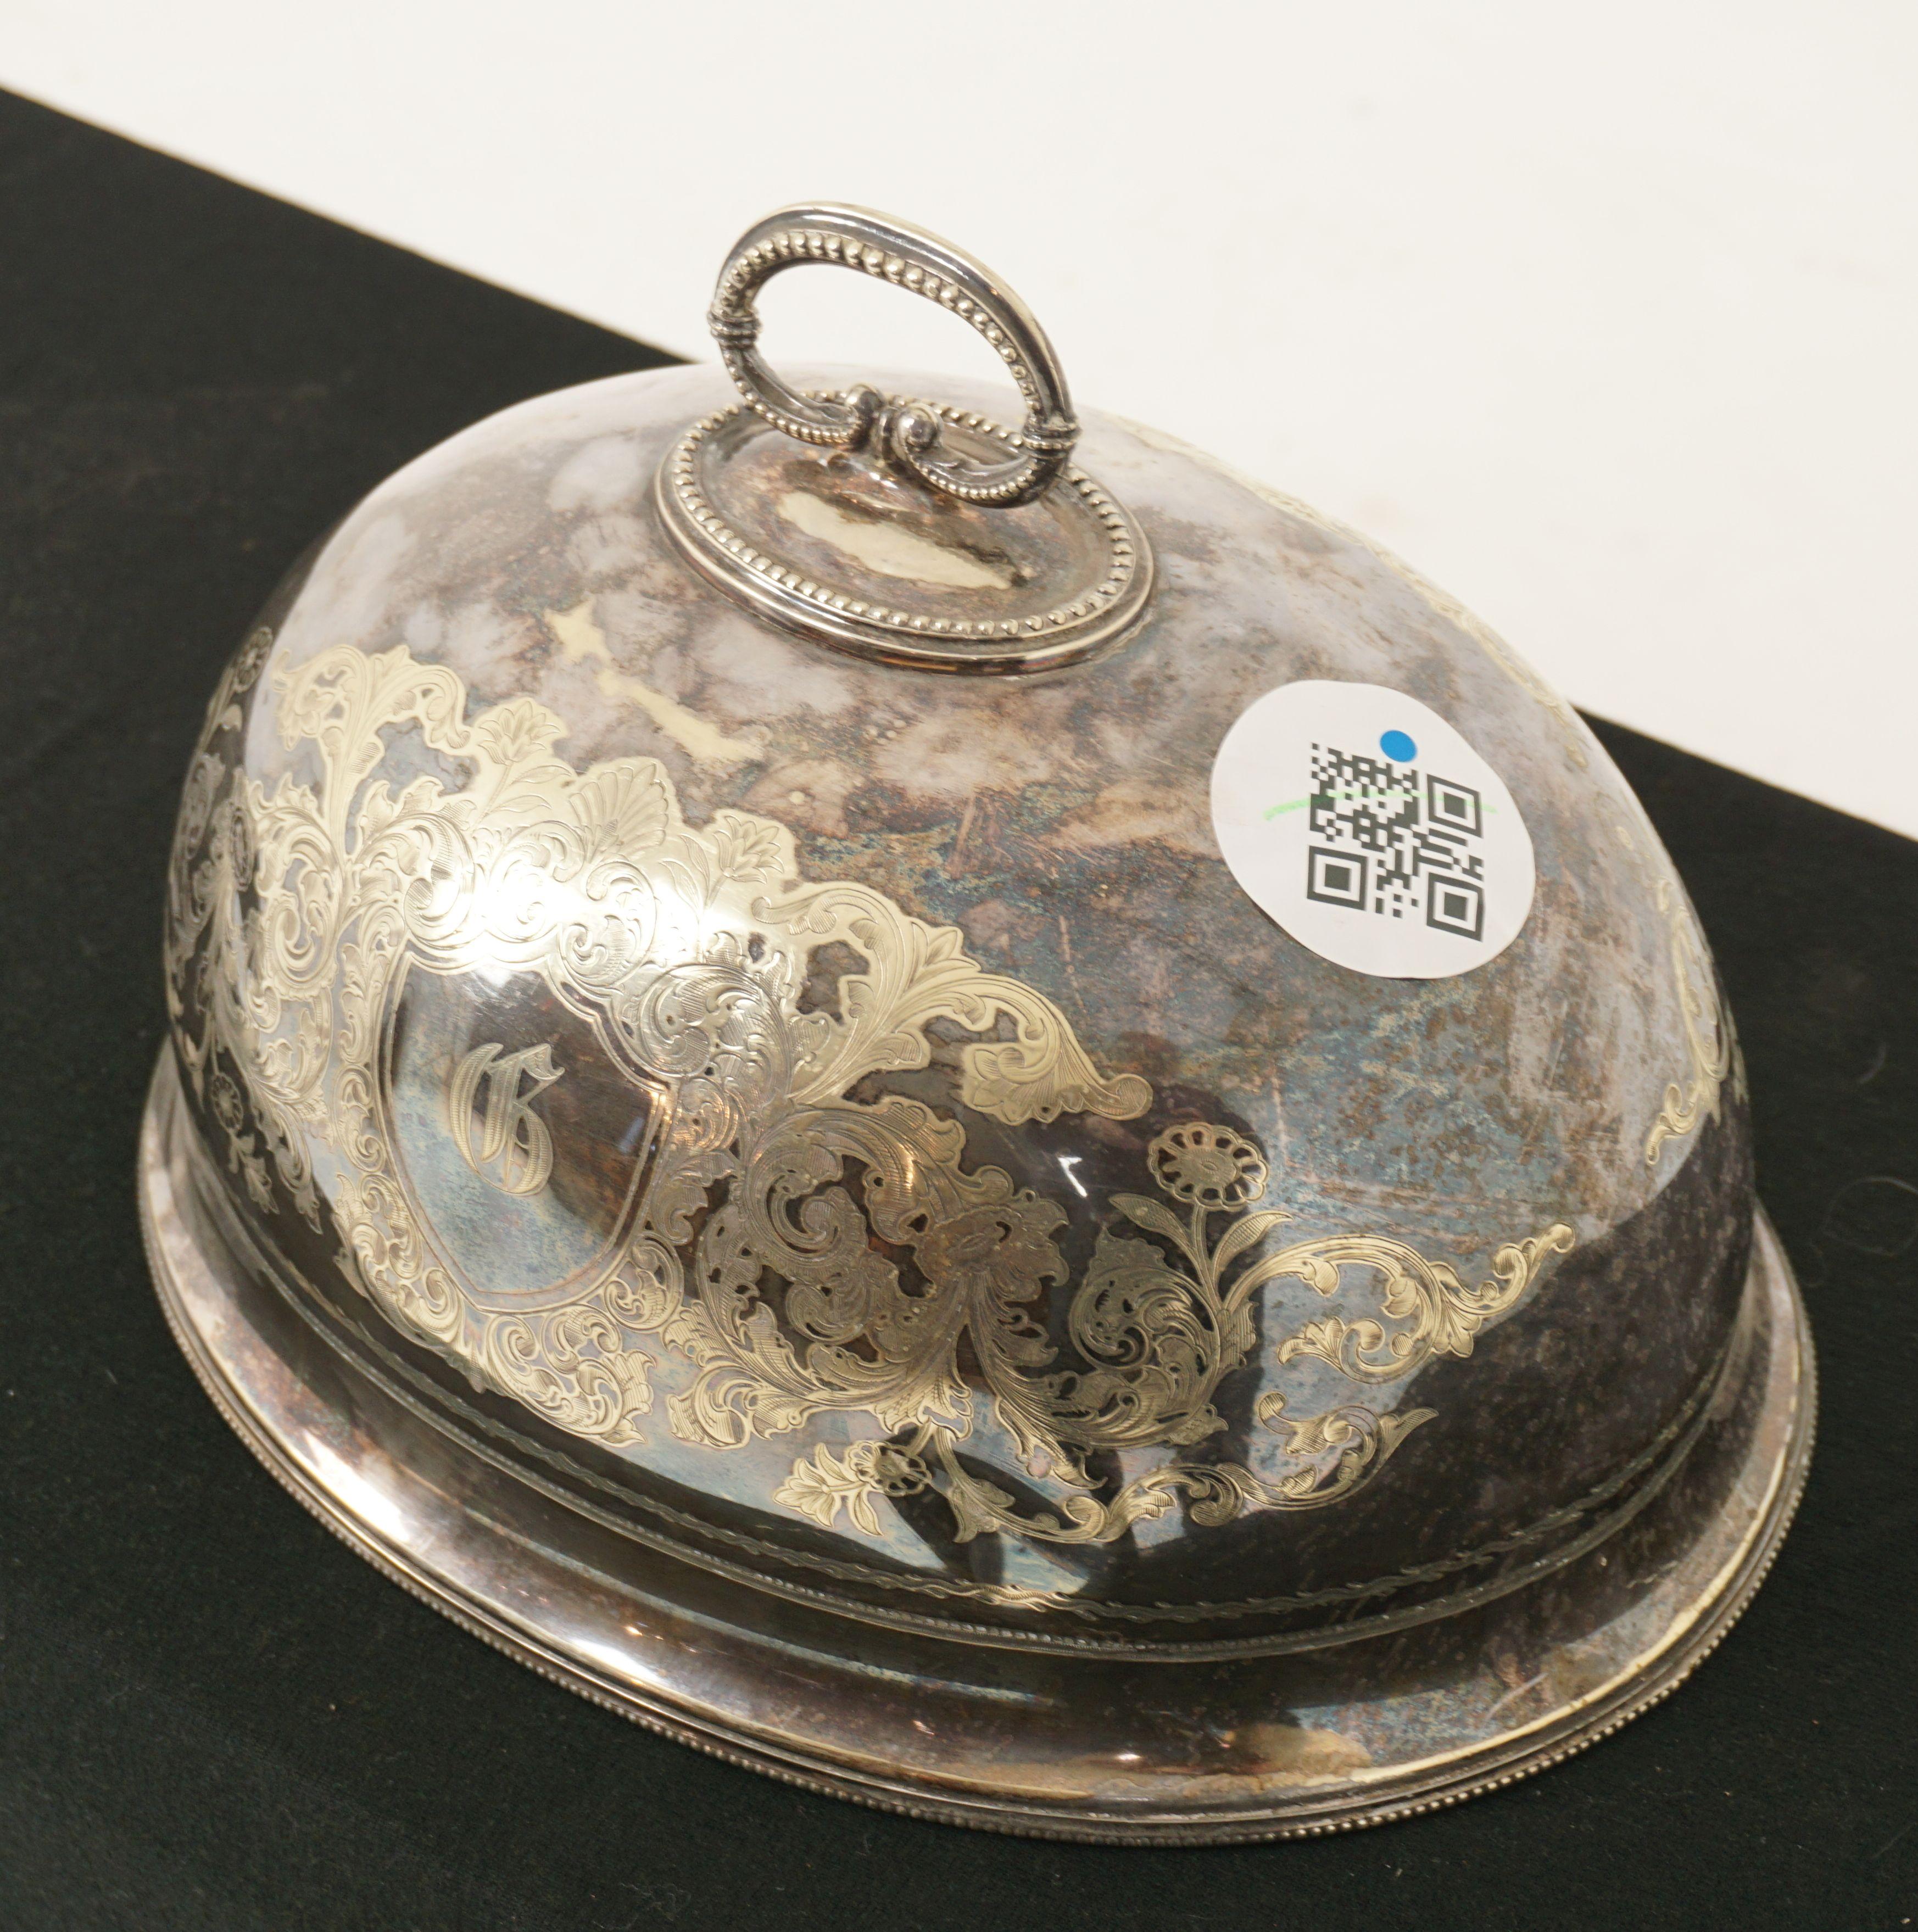 Antique Victorian Sheffield silver plate dome or food cover, England 1890, H626

England 1890
Silver plate
Wonderful shaped handle
Engraved on both sides with a plethora of ferns and monogrammed
Shows some denting in three spots
With a narrow